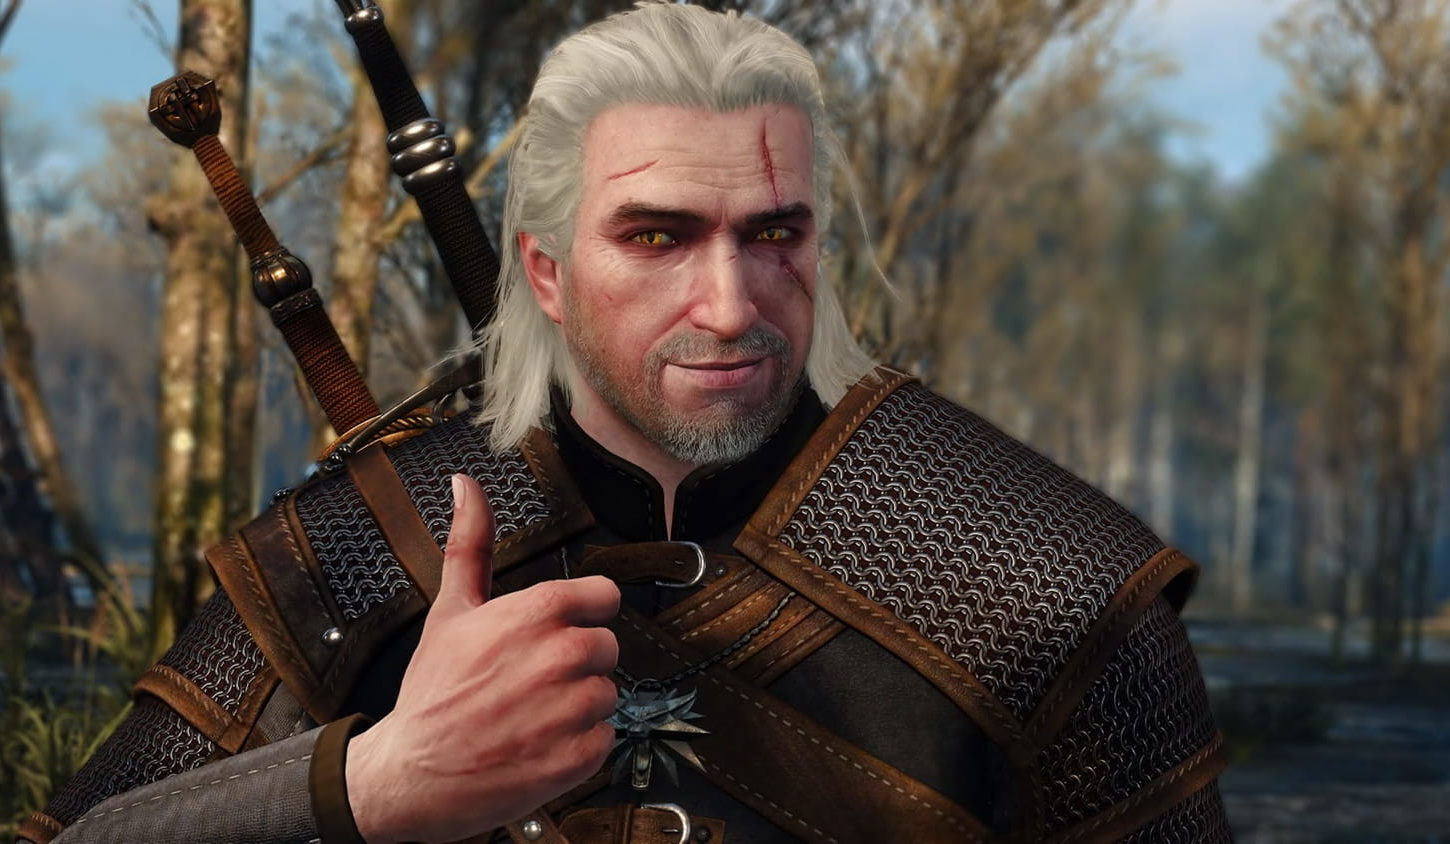 Discover 10 fascinating facts about The Witcher 2: Assassins of Kings